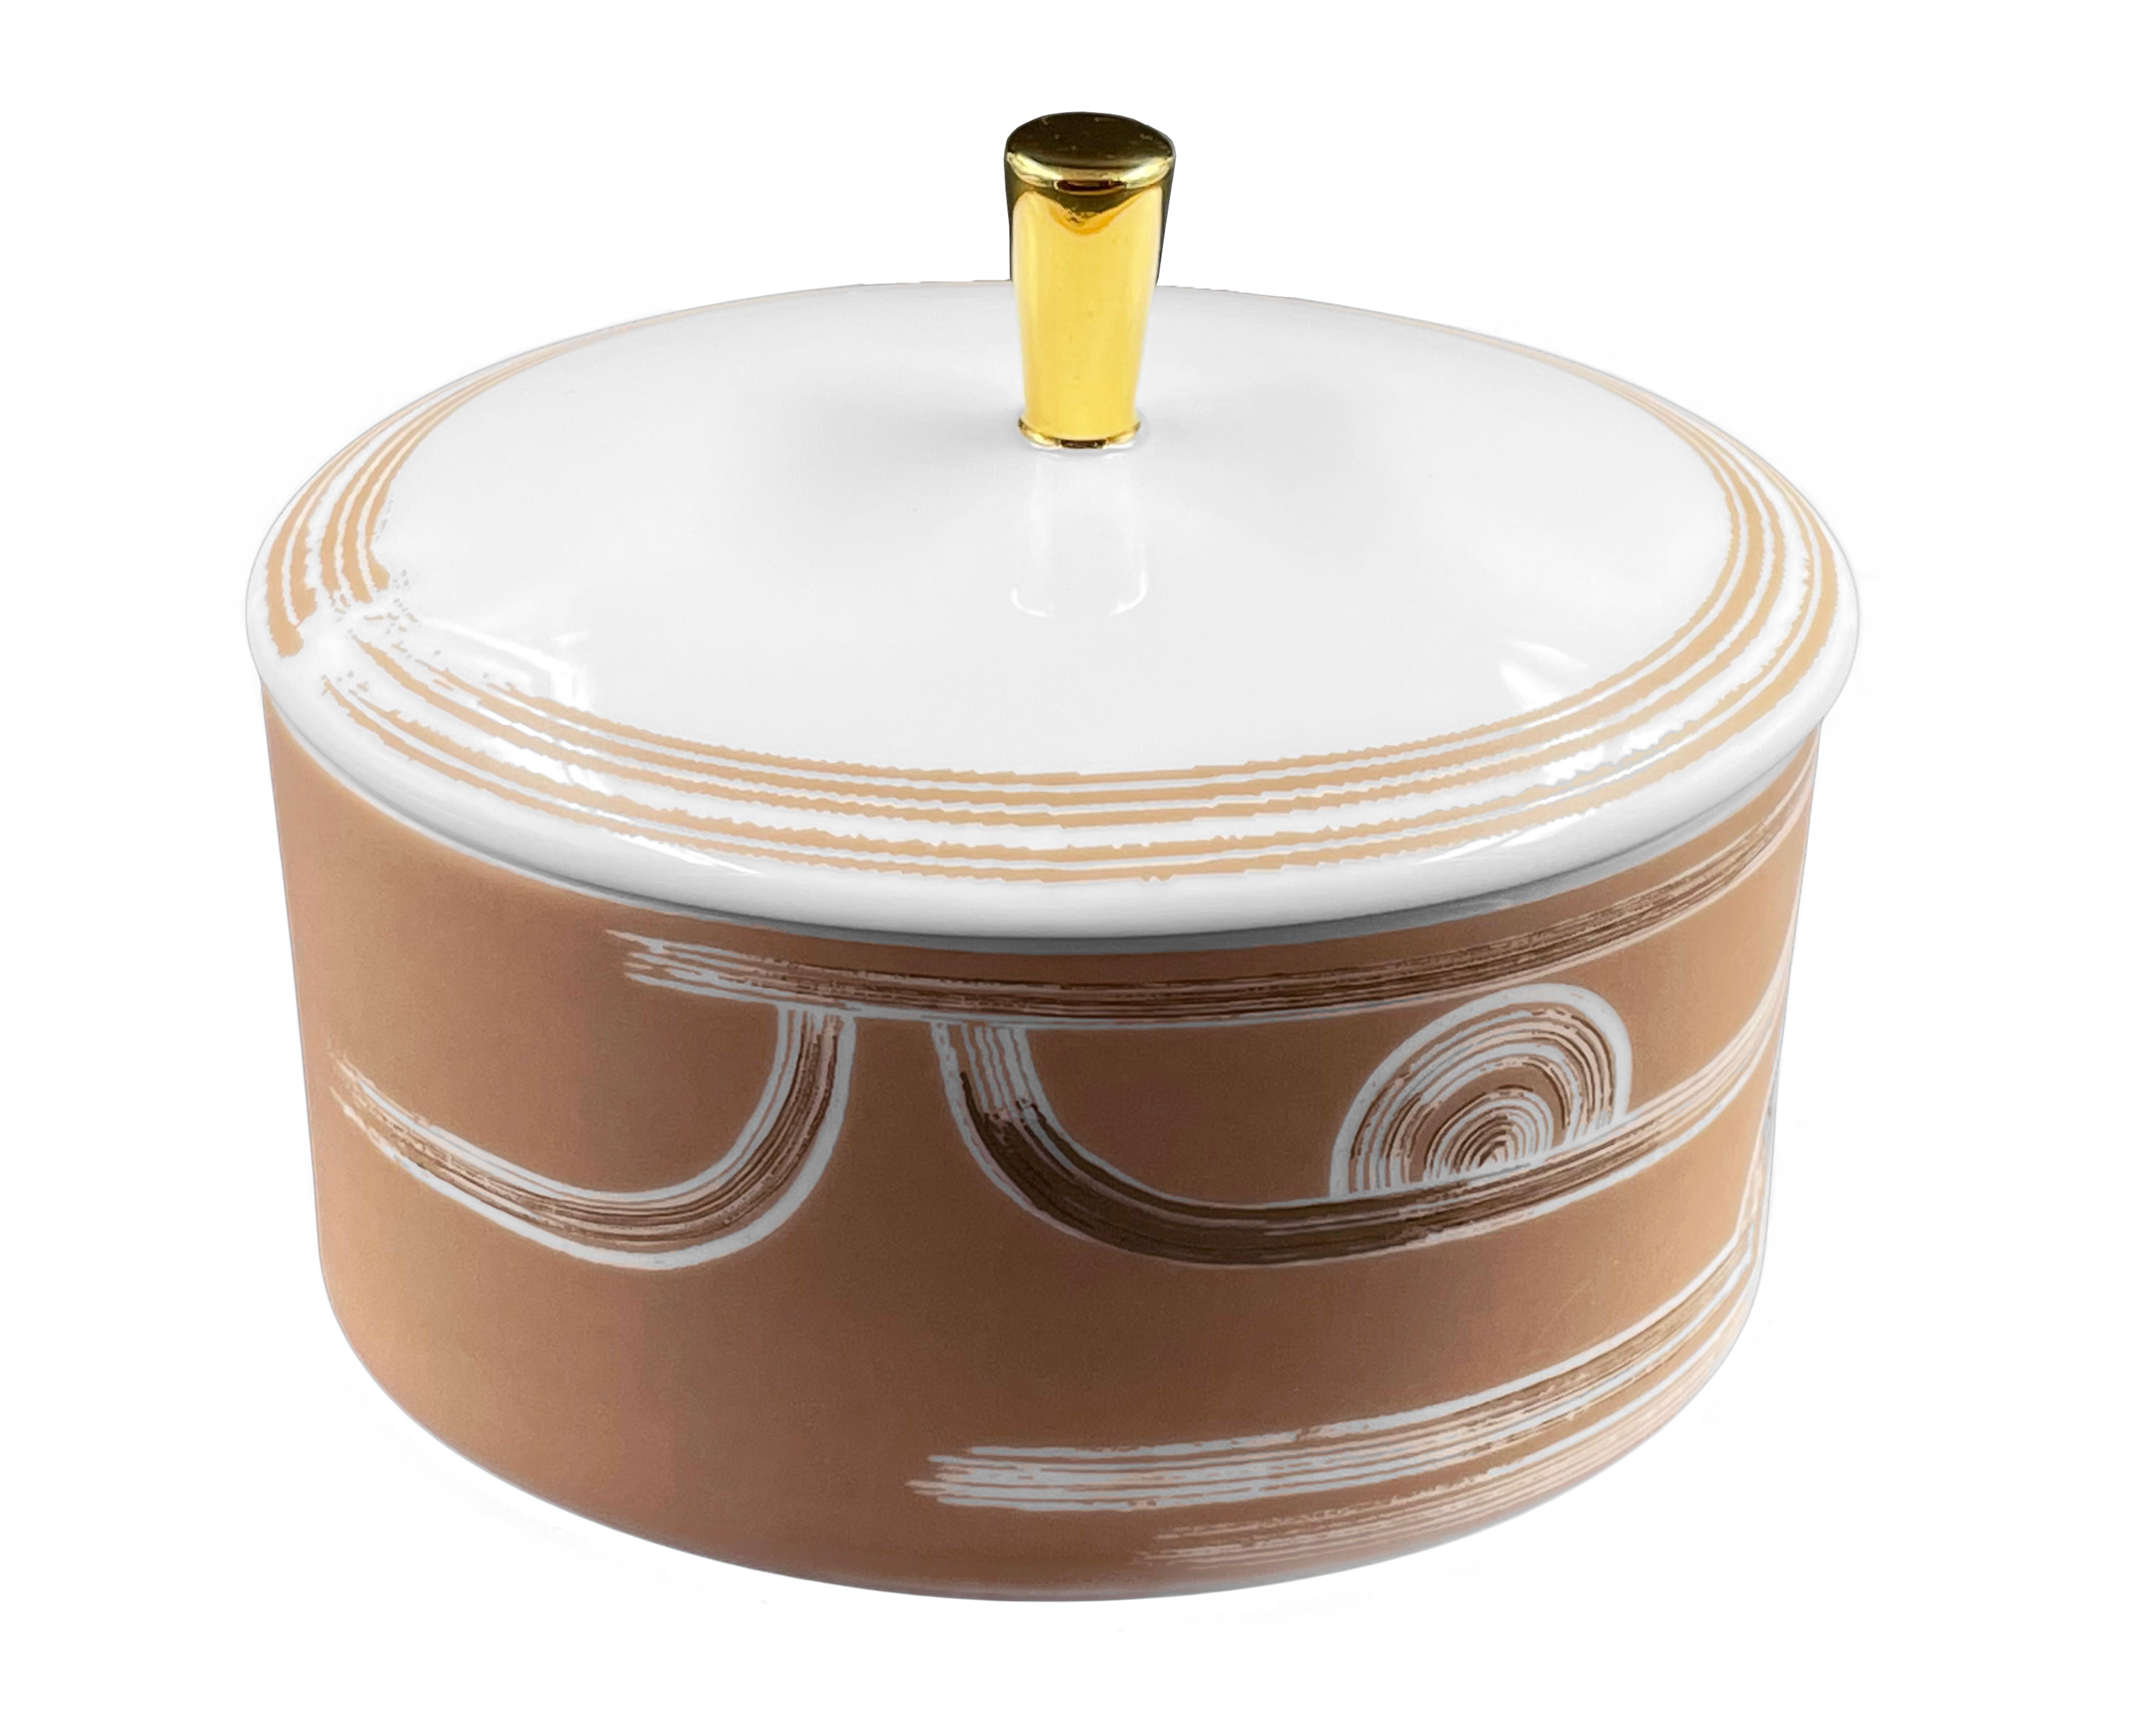 Description: Oval box with lid (2 pieces)
Color: Beige gold
Size: 10.5 Ø x 9 H cm
Material: Porcelain and gold
Collection: Art Déco Garden

Larger quantities available upon request, with 8 weeks production time.